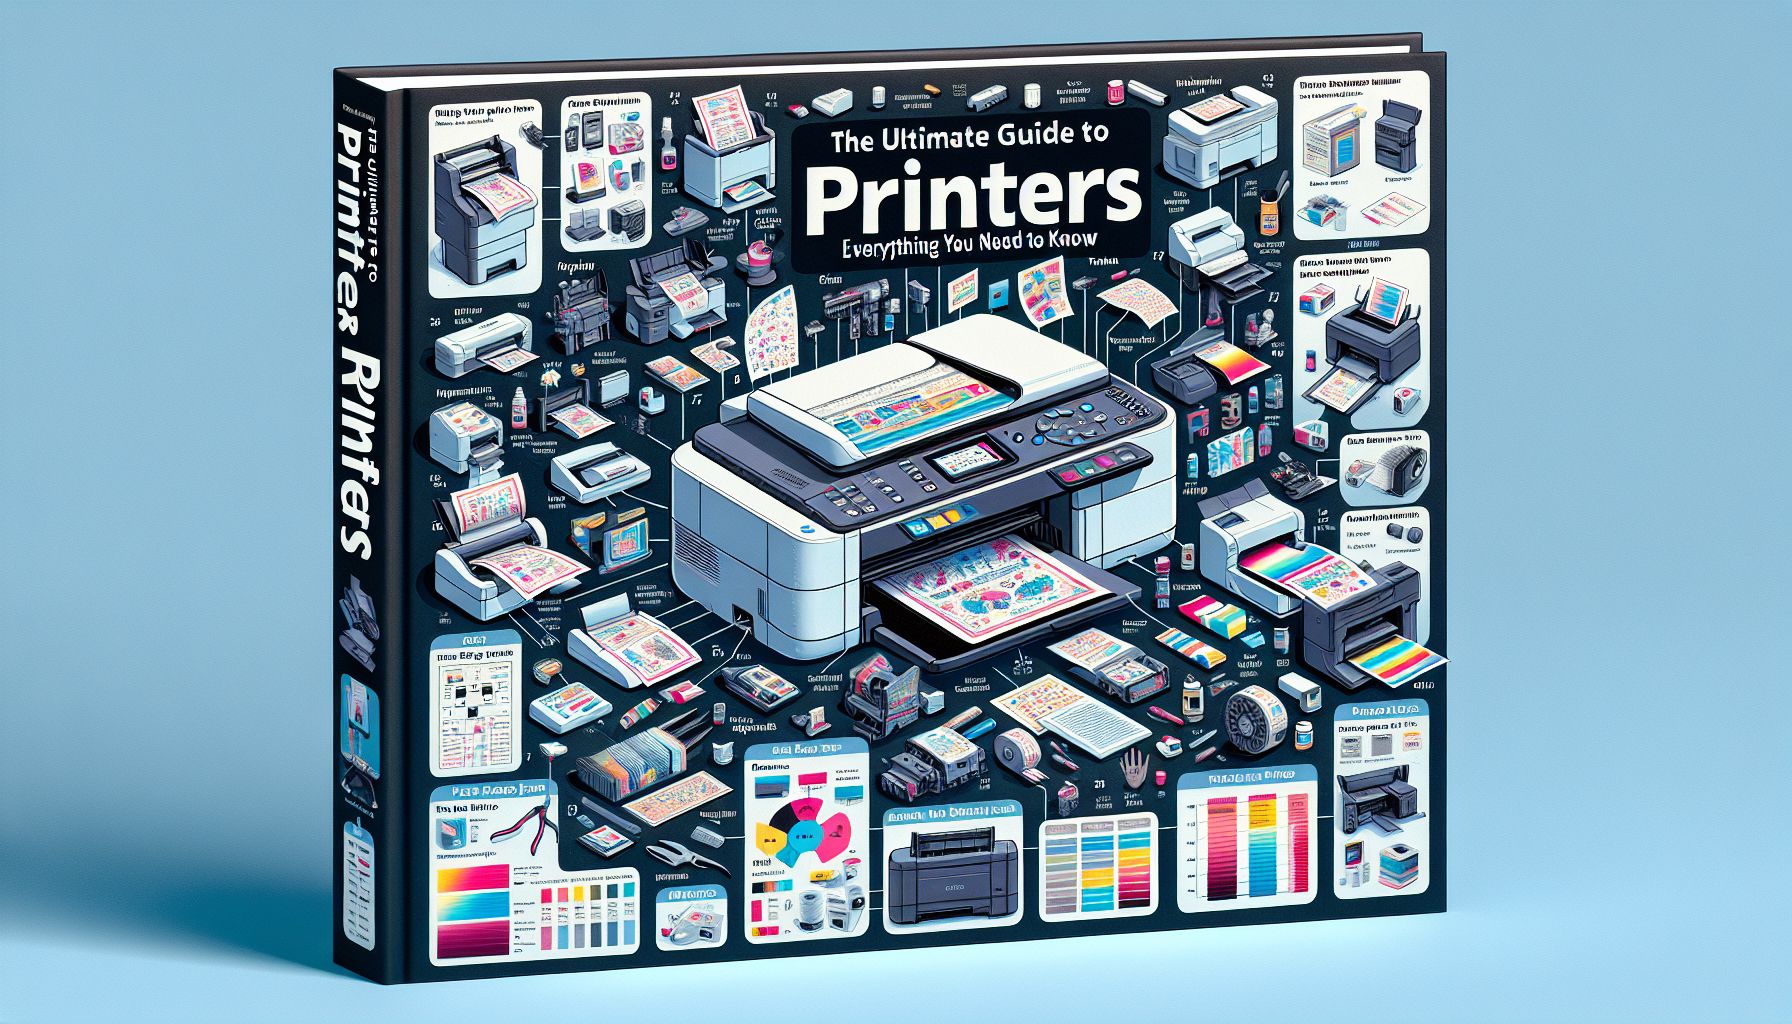 The Ultimate Guide to Printers: Everything You Need to Know